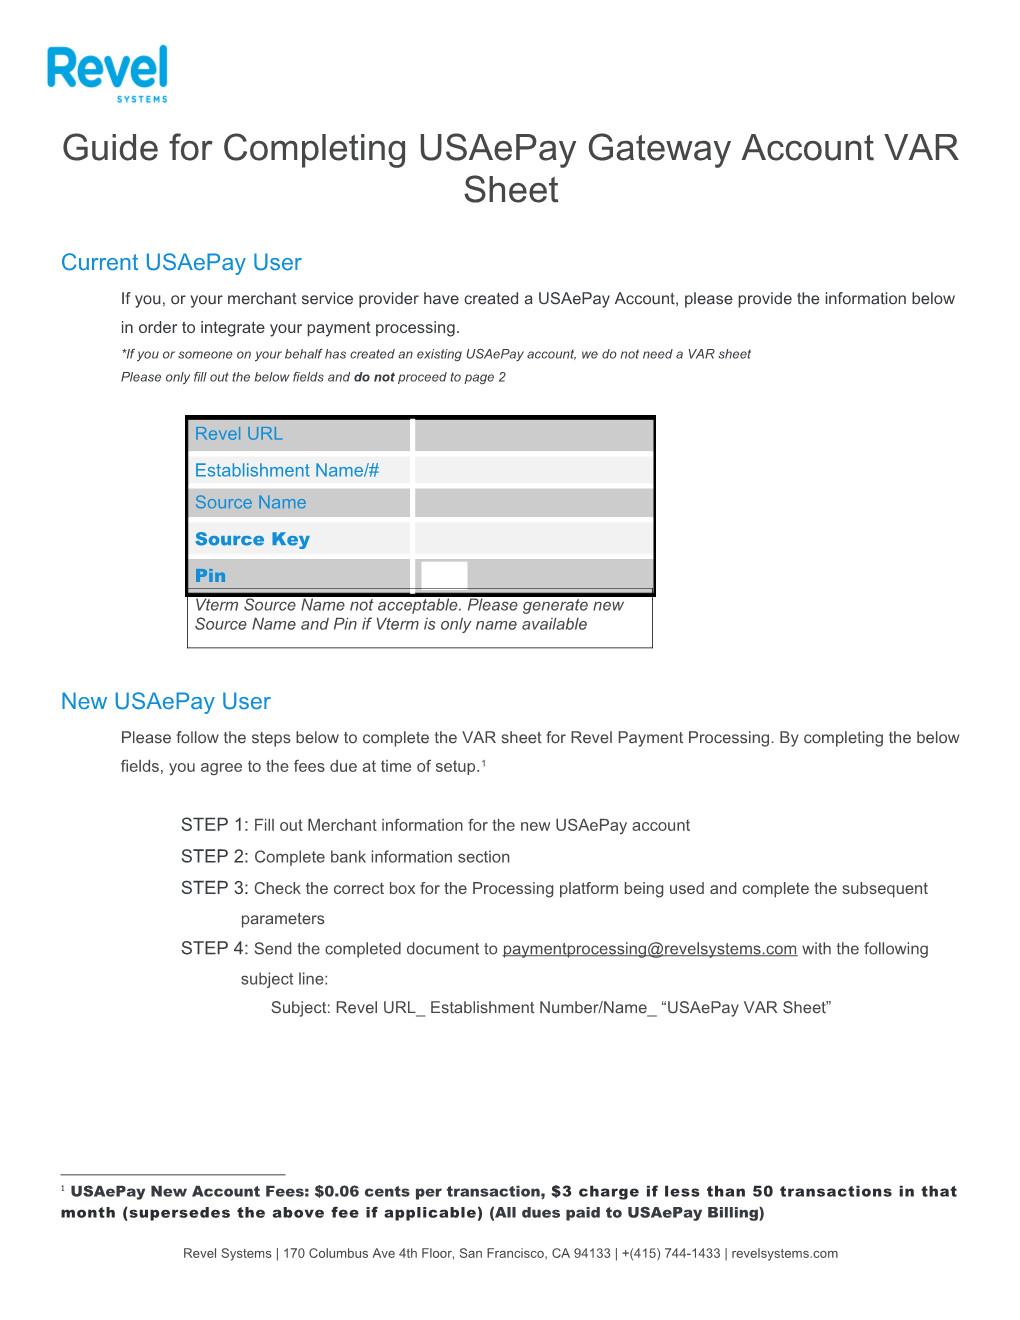 Guide for Completing Usaepay Gateway Account VAR Sheet